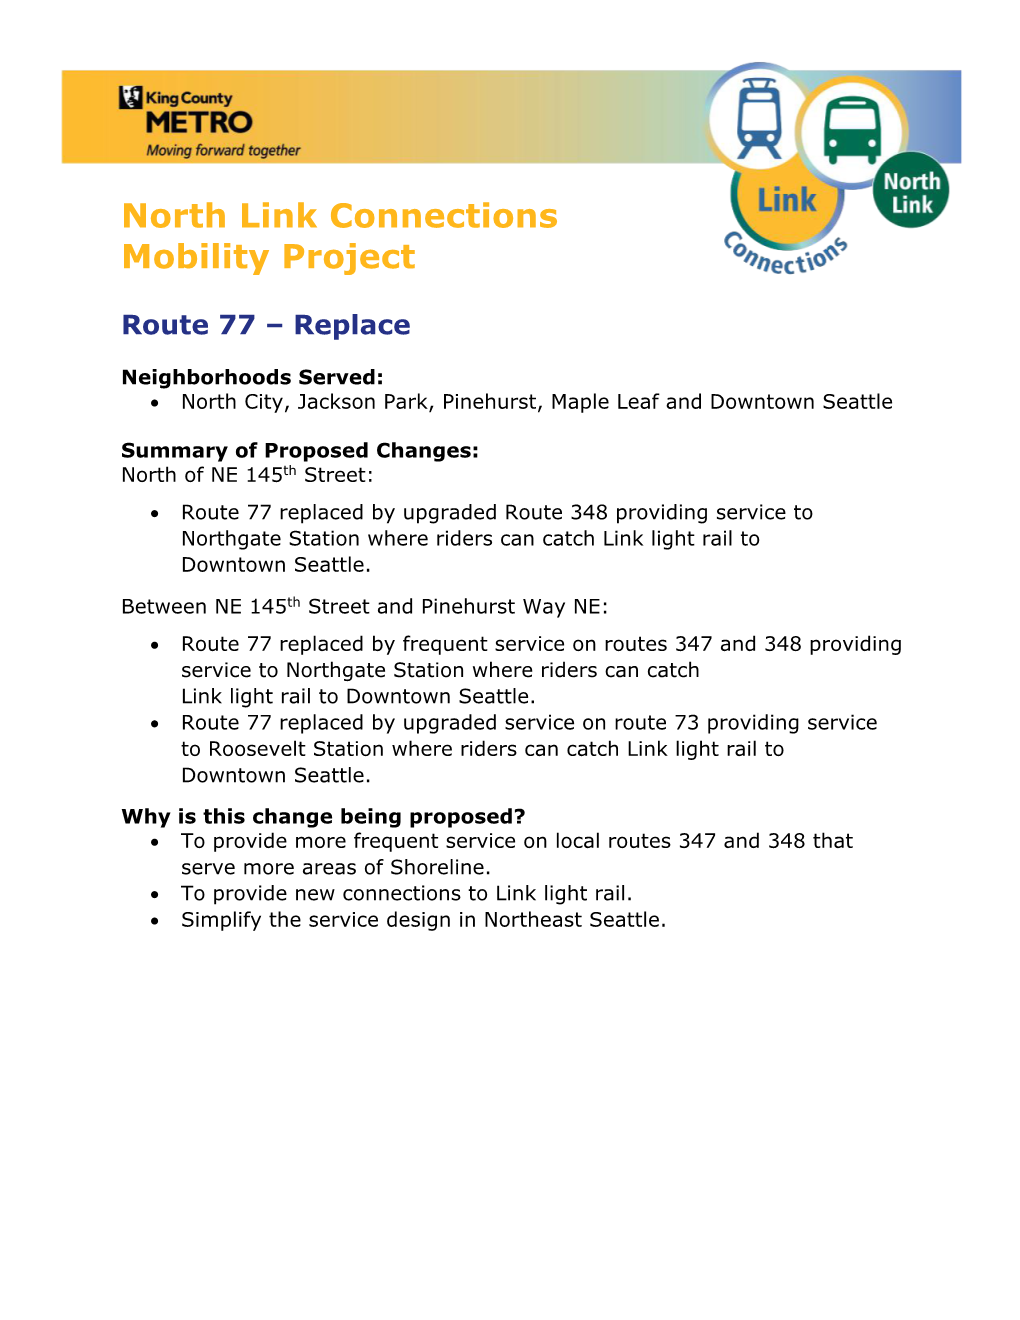 North Link Connections Mobility Project